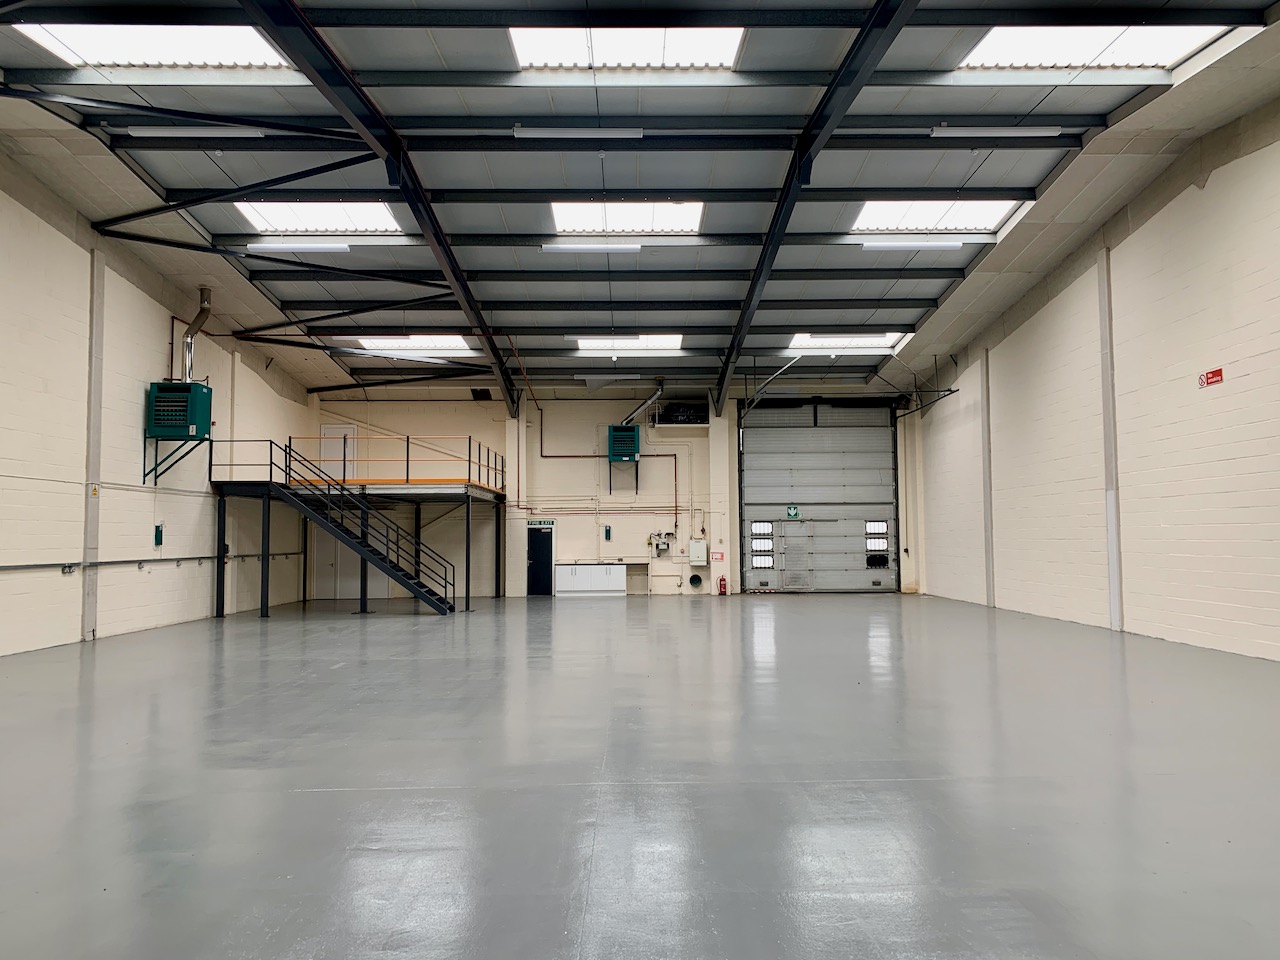 18-Plover-Close-Newport-Pagnell-Warehouse-internal-2